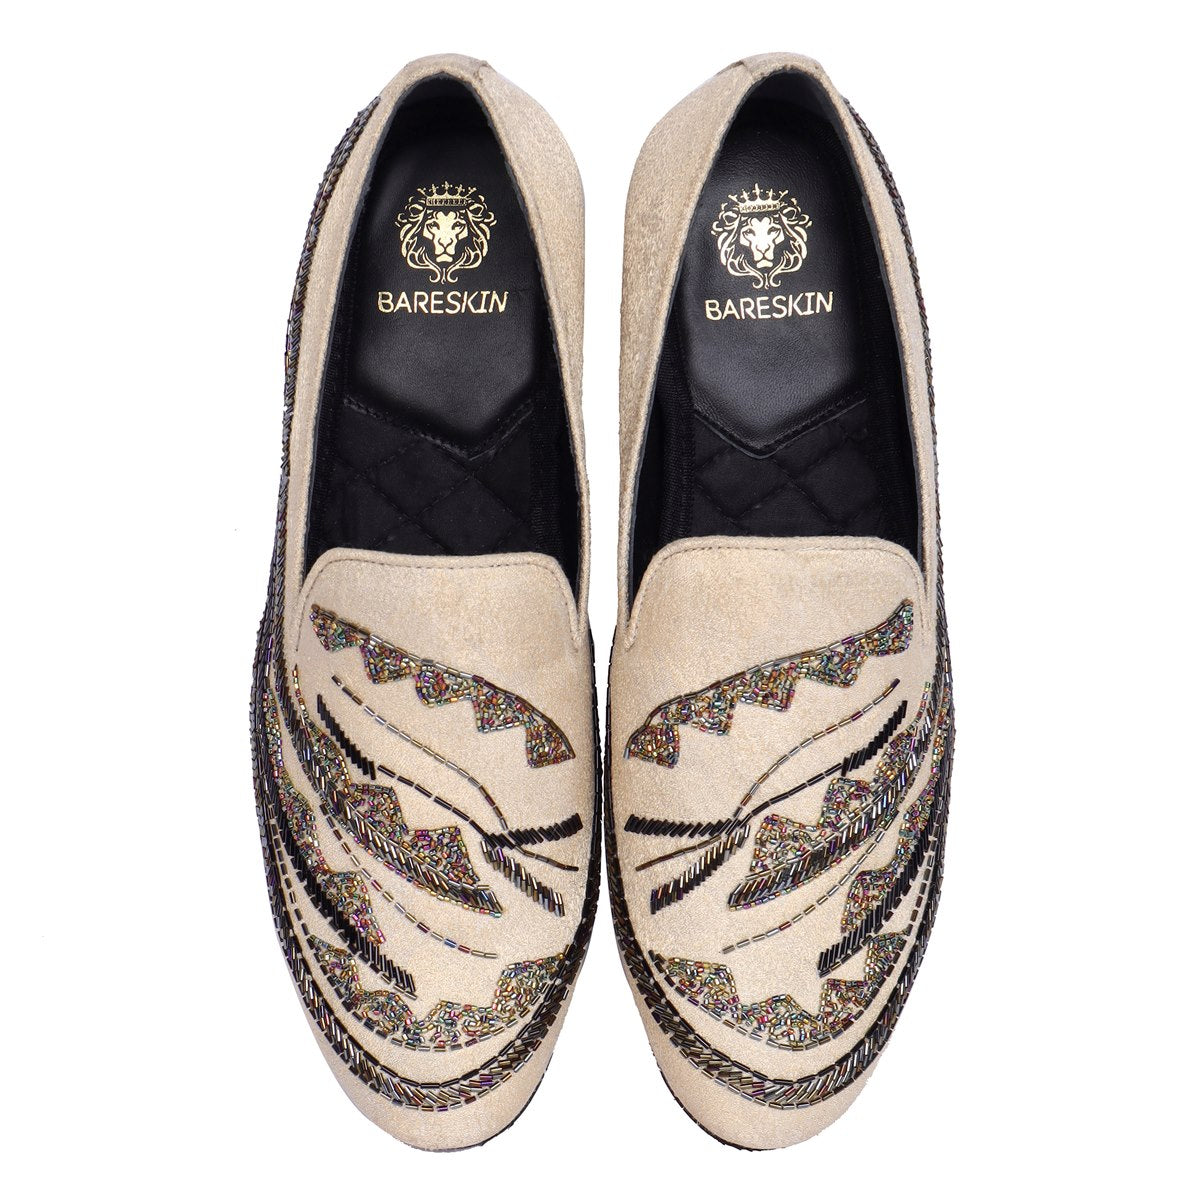 Men's Beige Zardosi Slip-On Shoes with Multi Color Abstract Embellishments